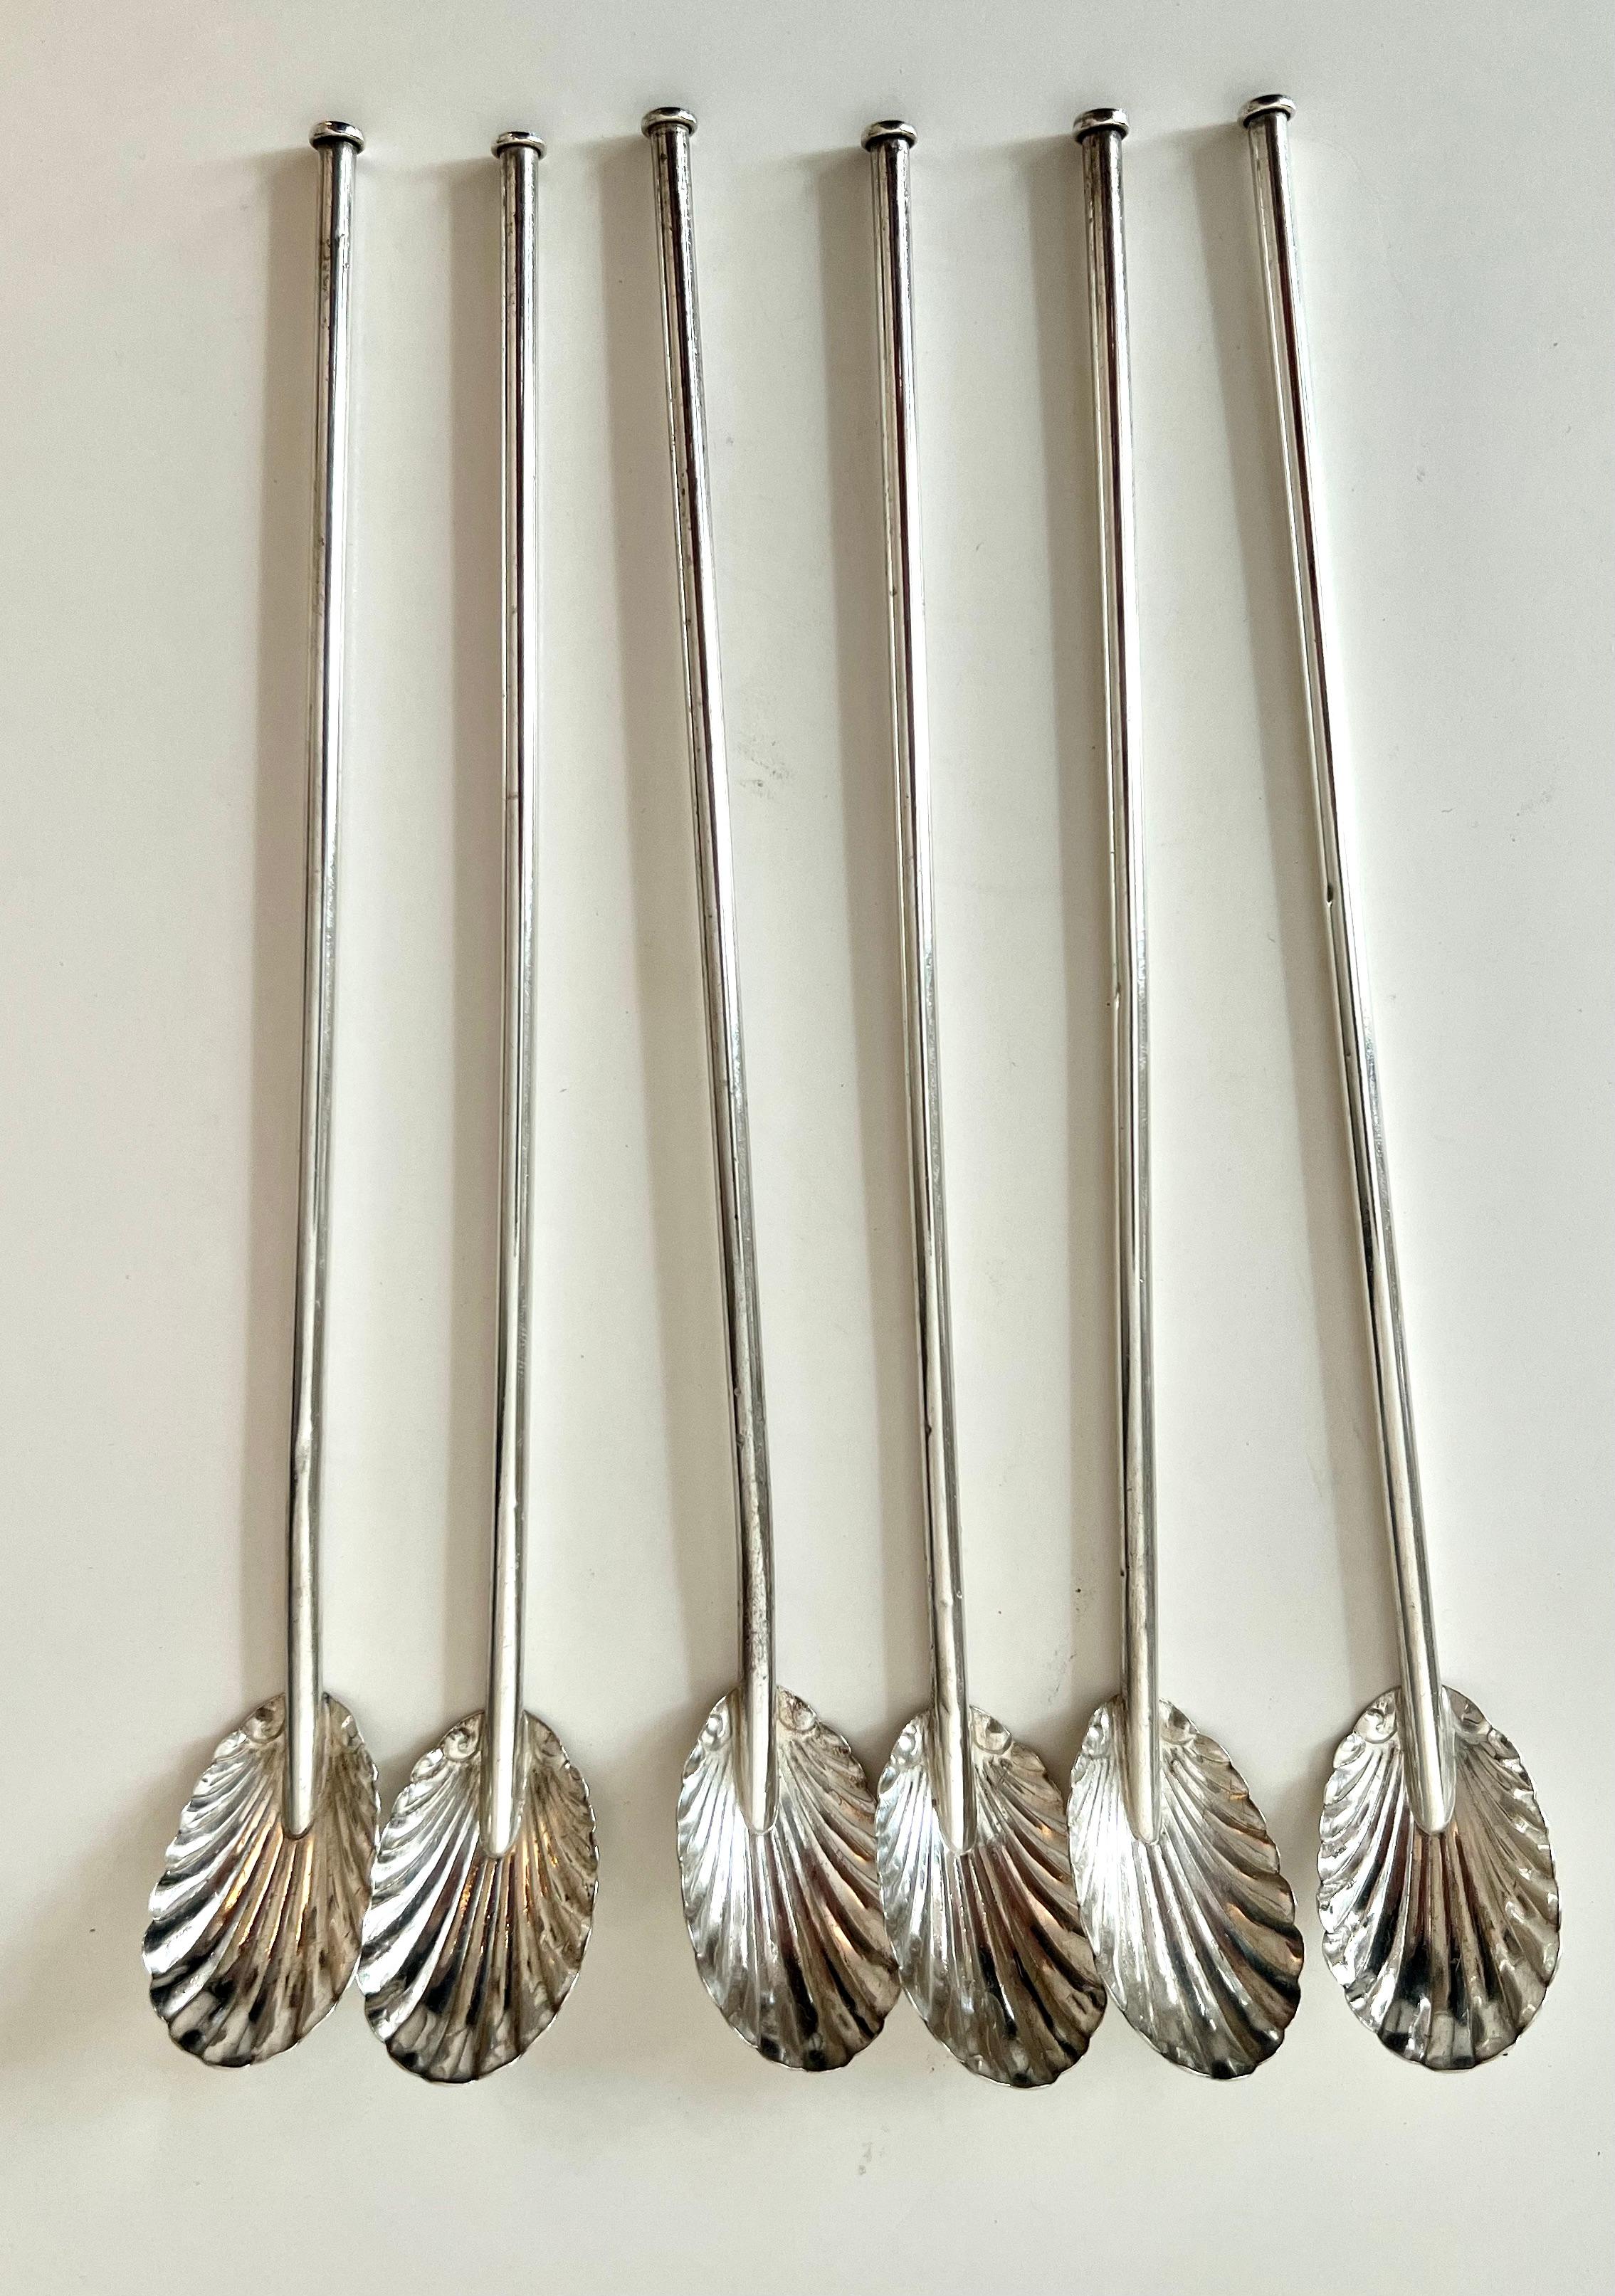 6 French Sterling Iced Tea Scallop Clam Shell Spoons For Sale 1